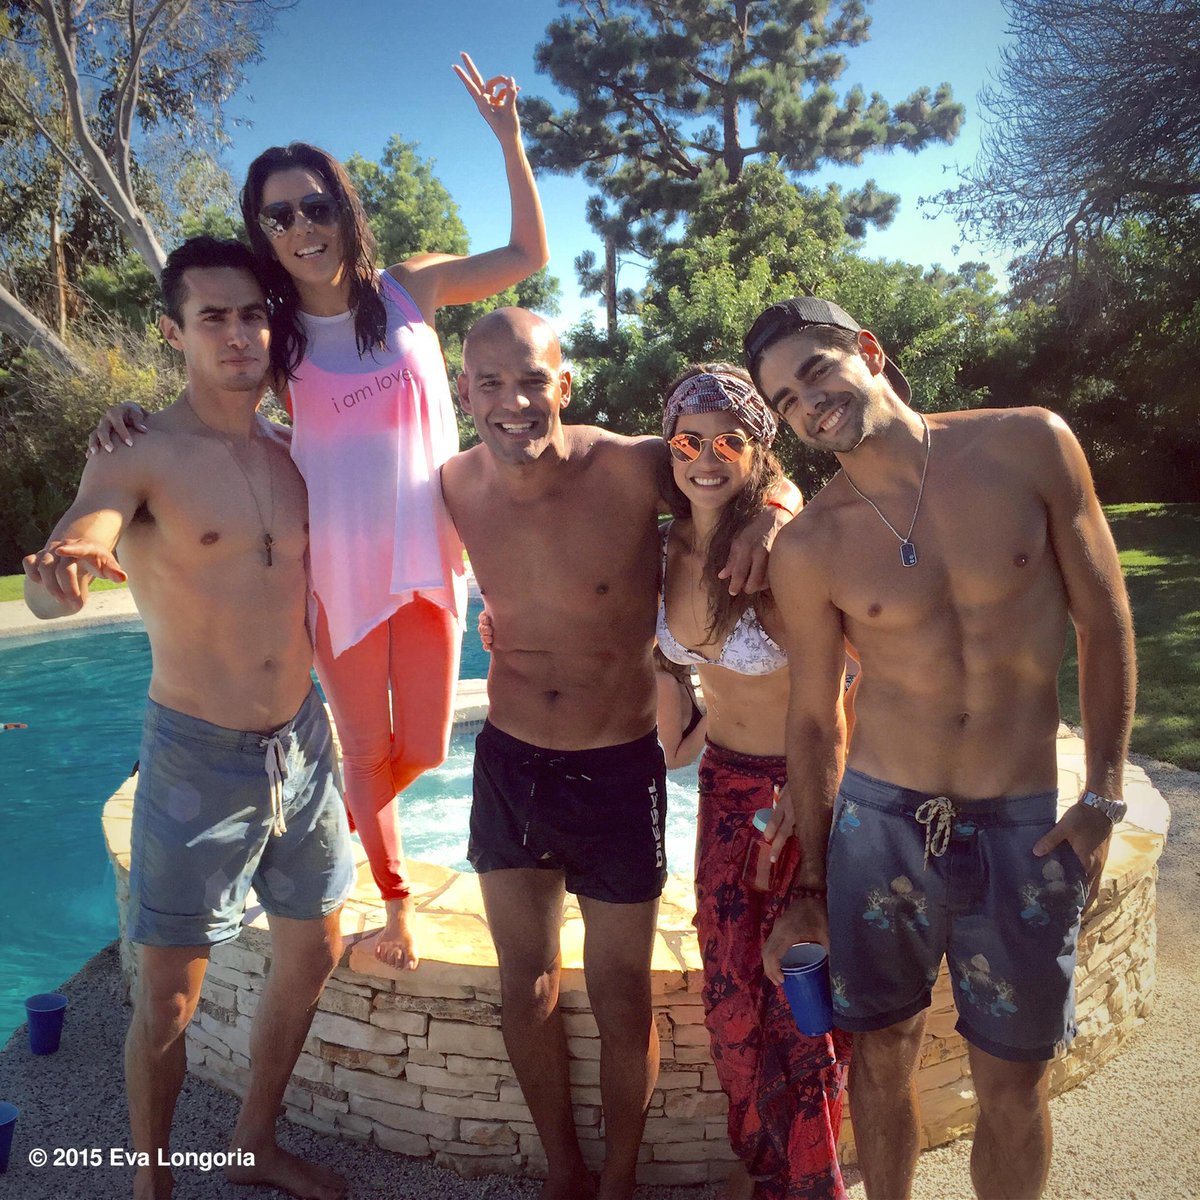 Pool party! With @amaurynolasco @josebrooks I was thrown in pool with all my clothes! #friends #LA http://t.co/t6H4rjIG99